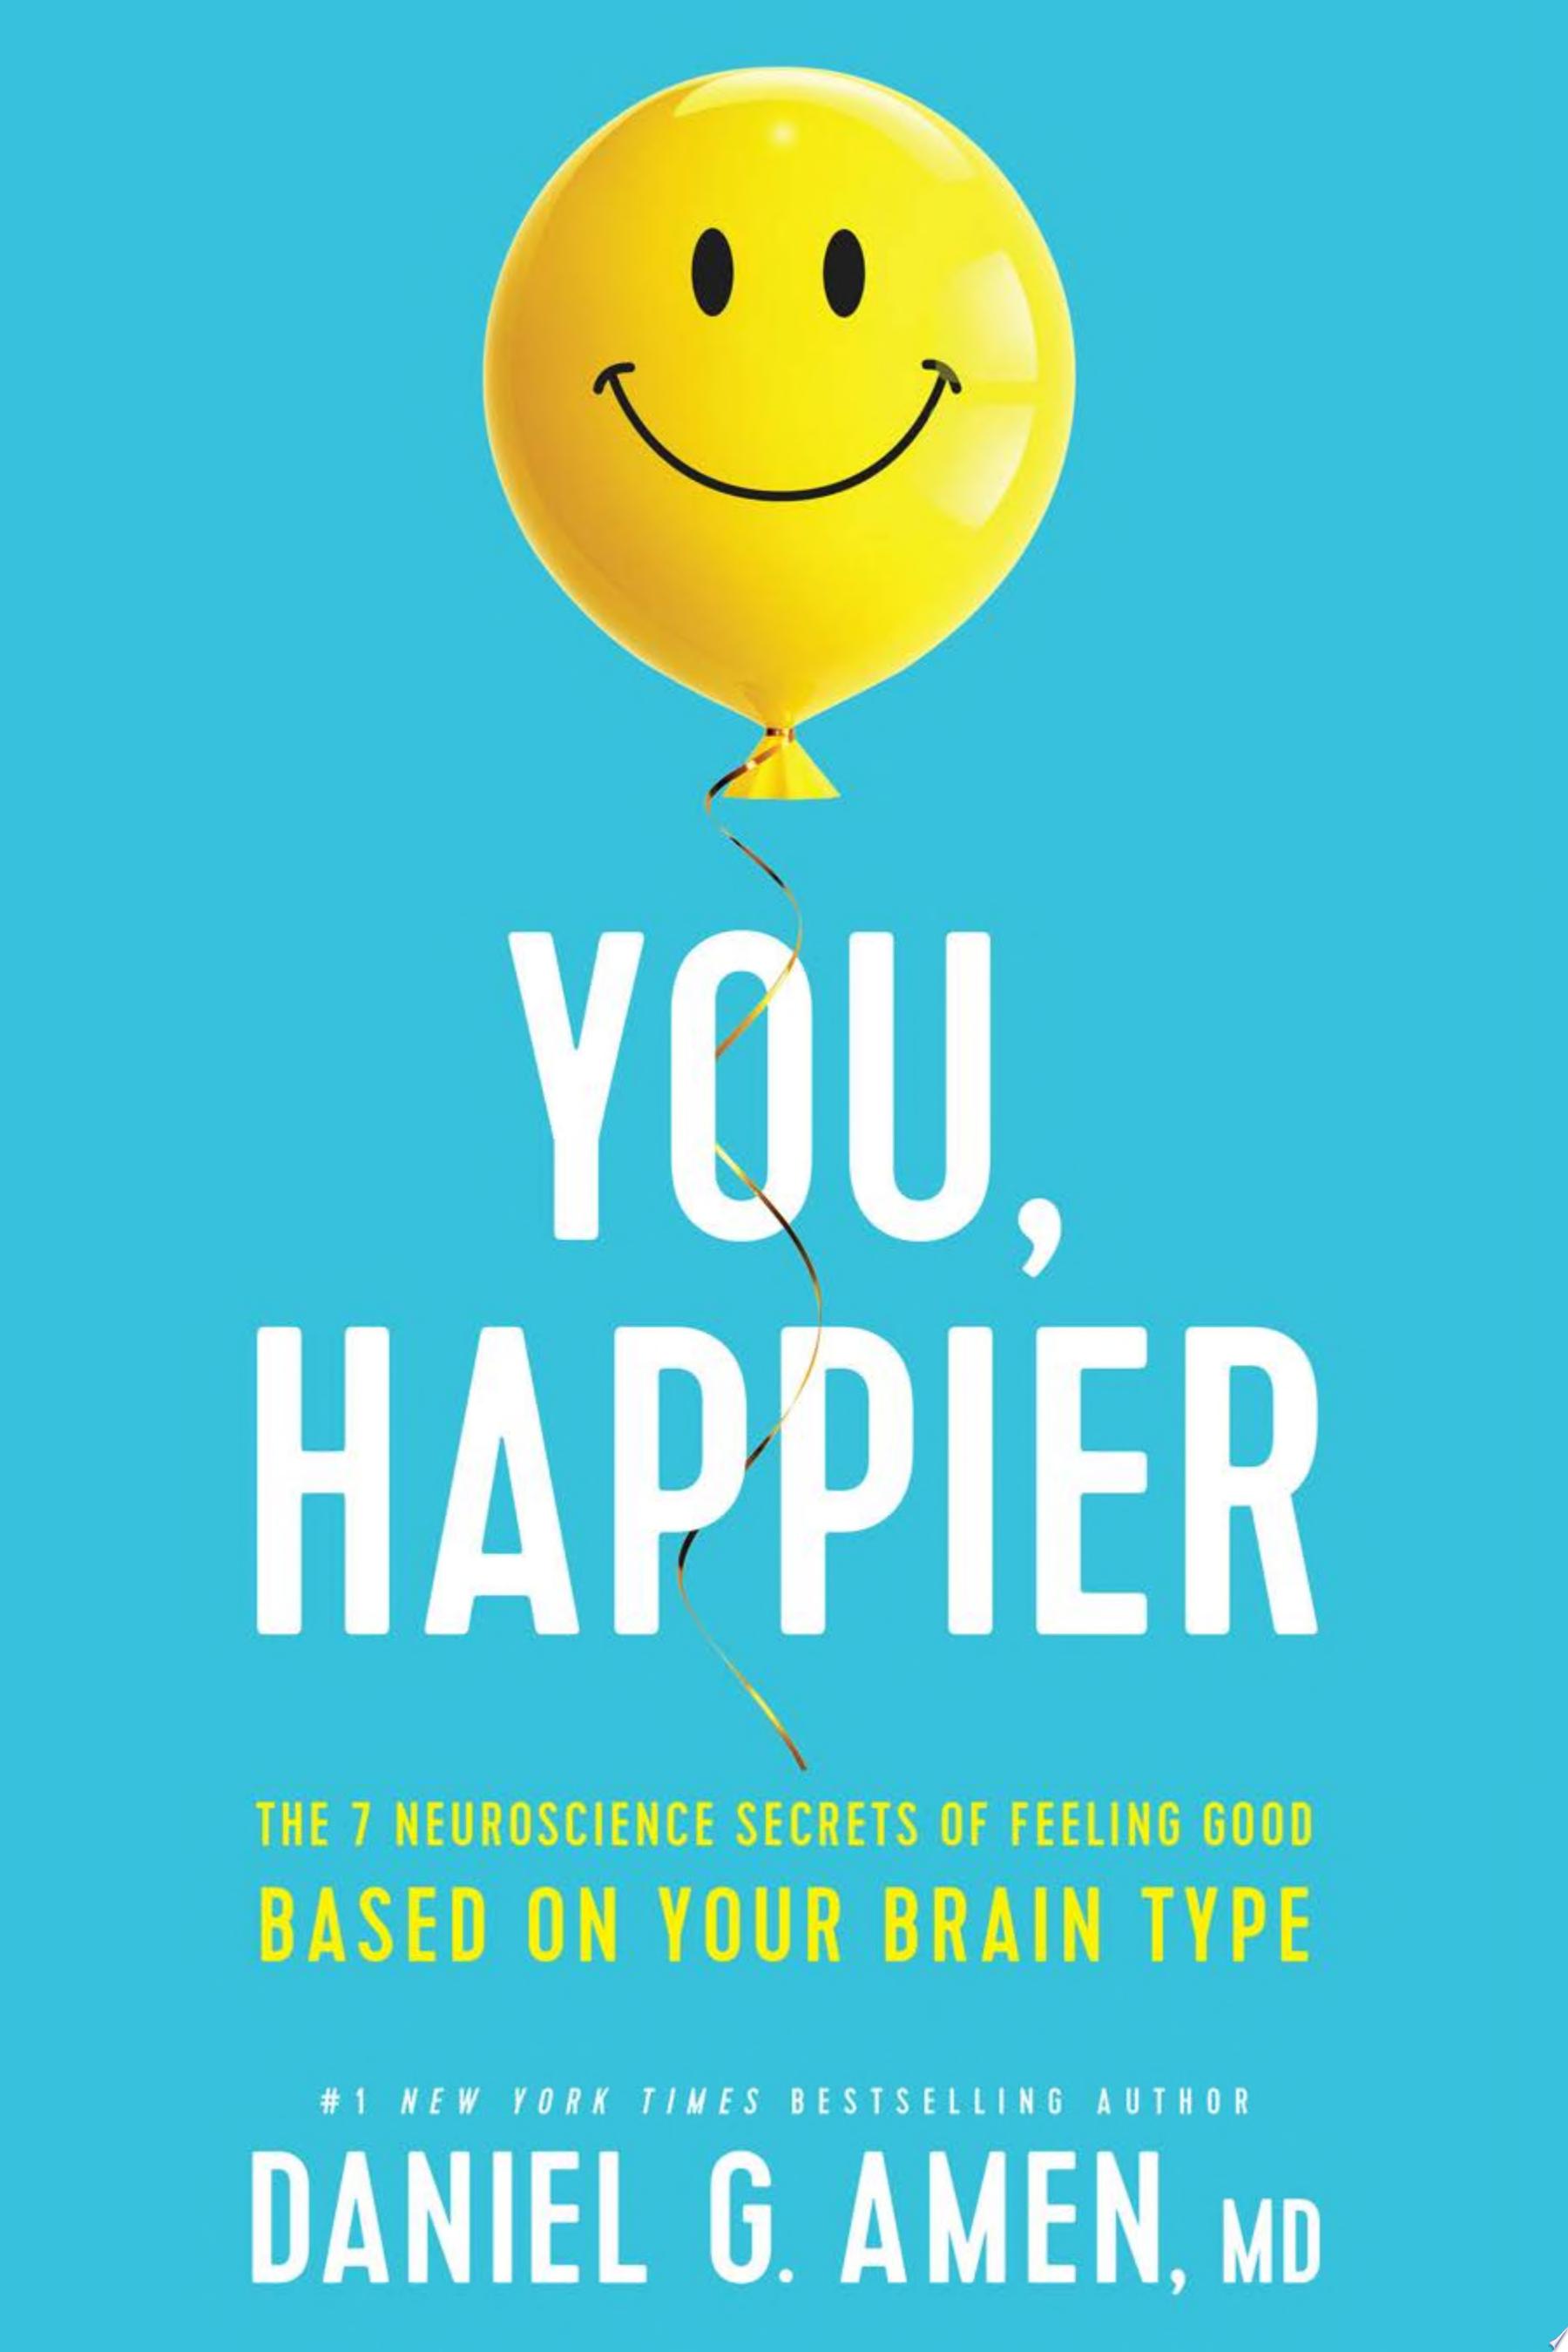 Image for "You, Happier"